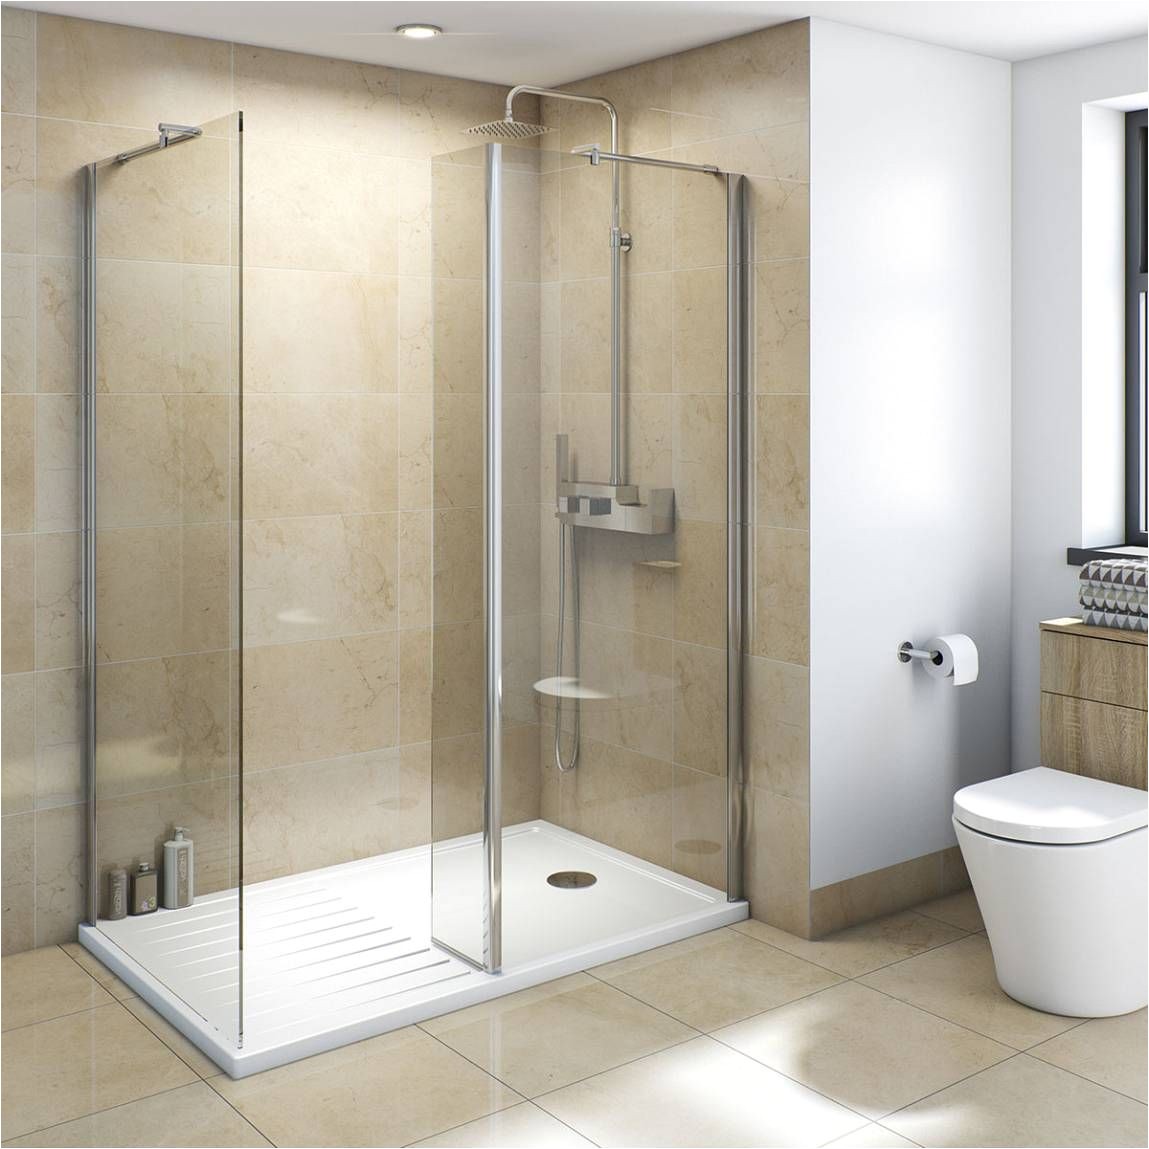 the minimalist walk in shower pack is a contemporary and modernist design which incorporates a polished chrome profile modern chrome horizontal fixing bar